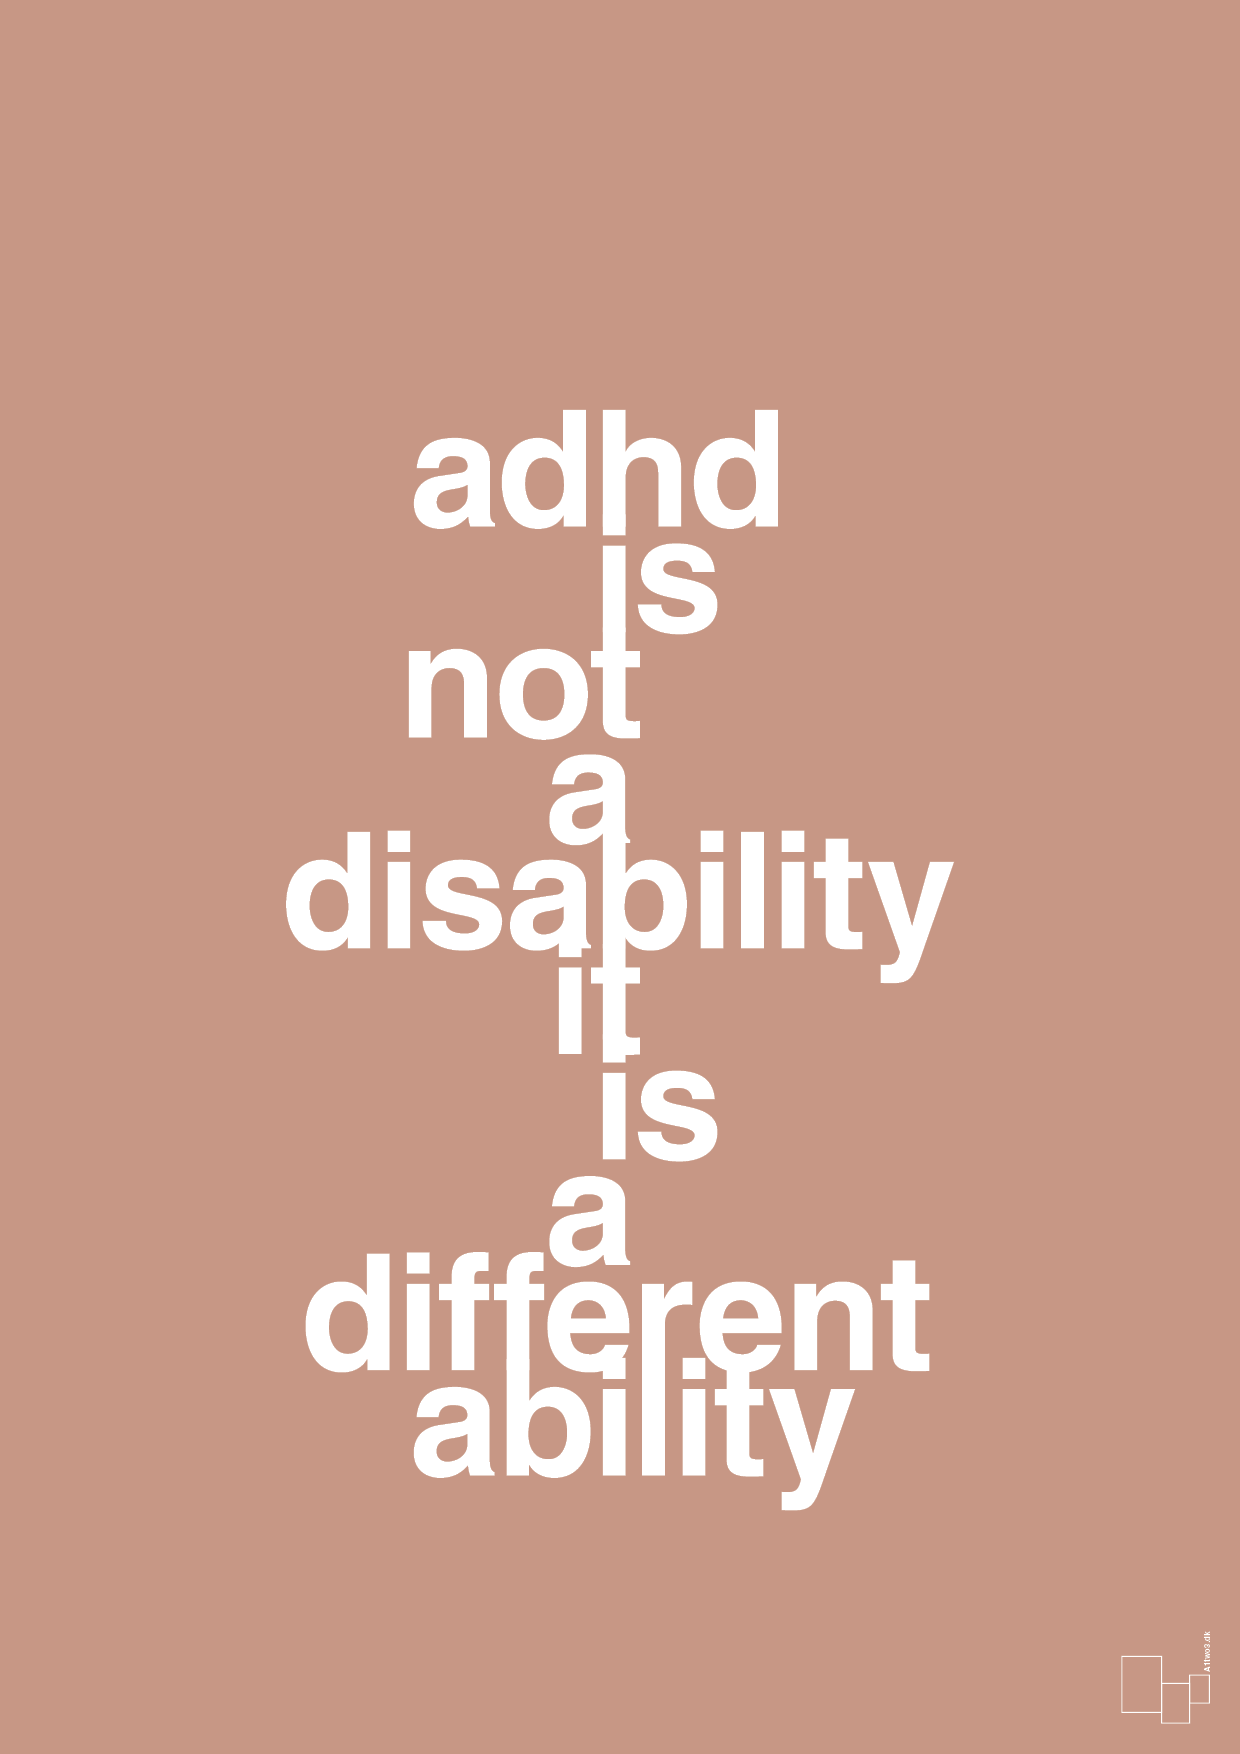 adhd is not a disability it is a different ability - Plakat med Samfund i Powder